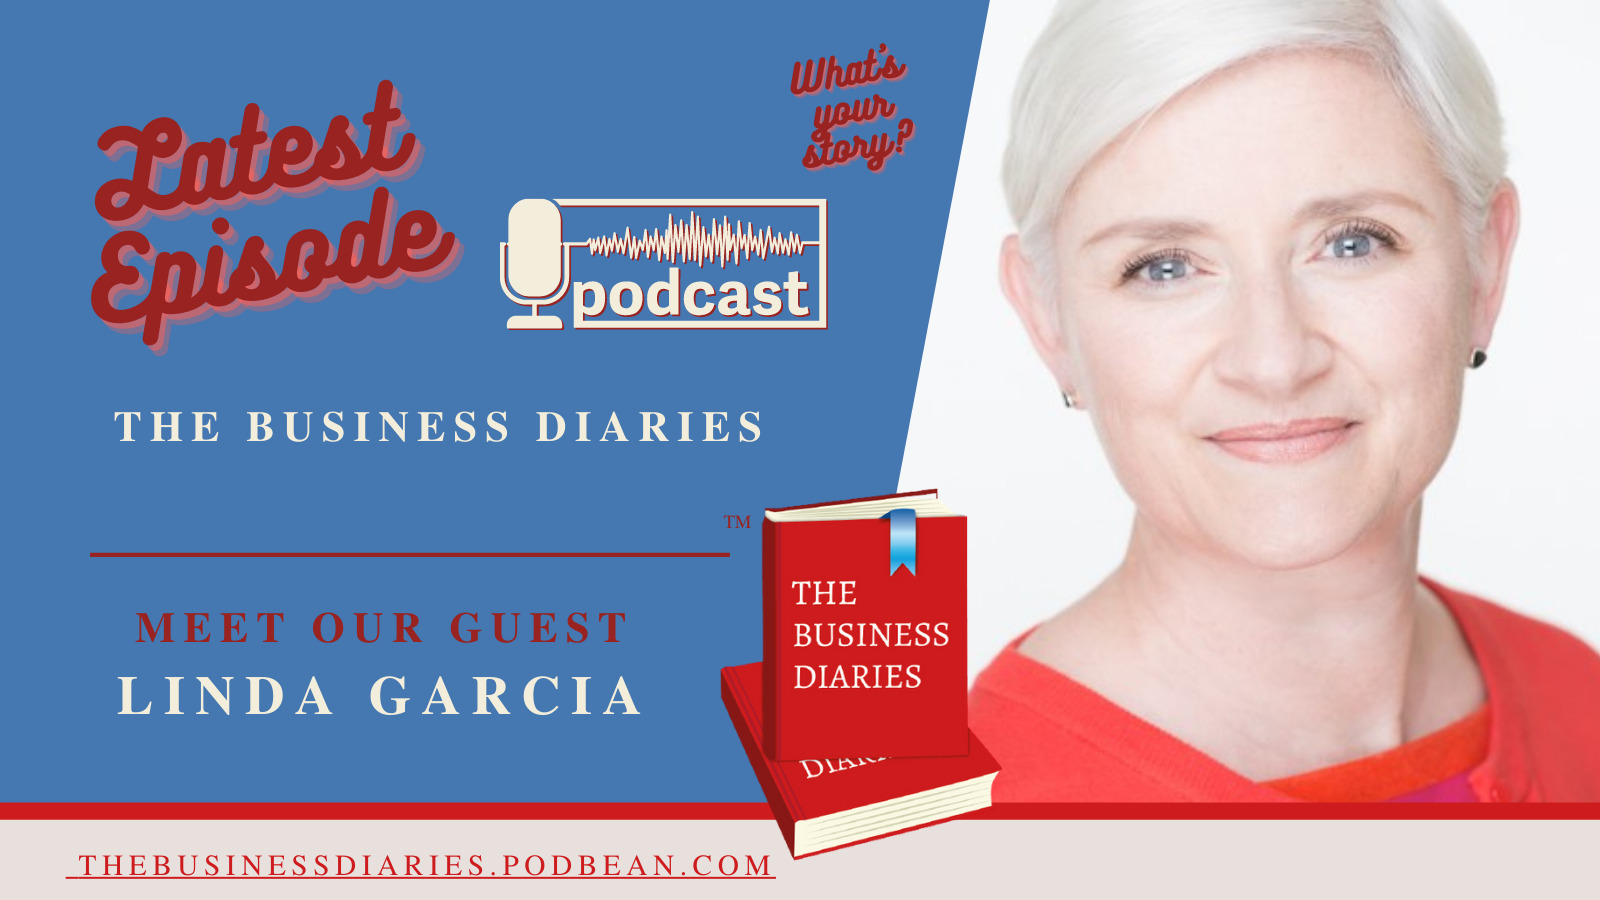 Linda Garcia on Business Diaries podcast